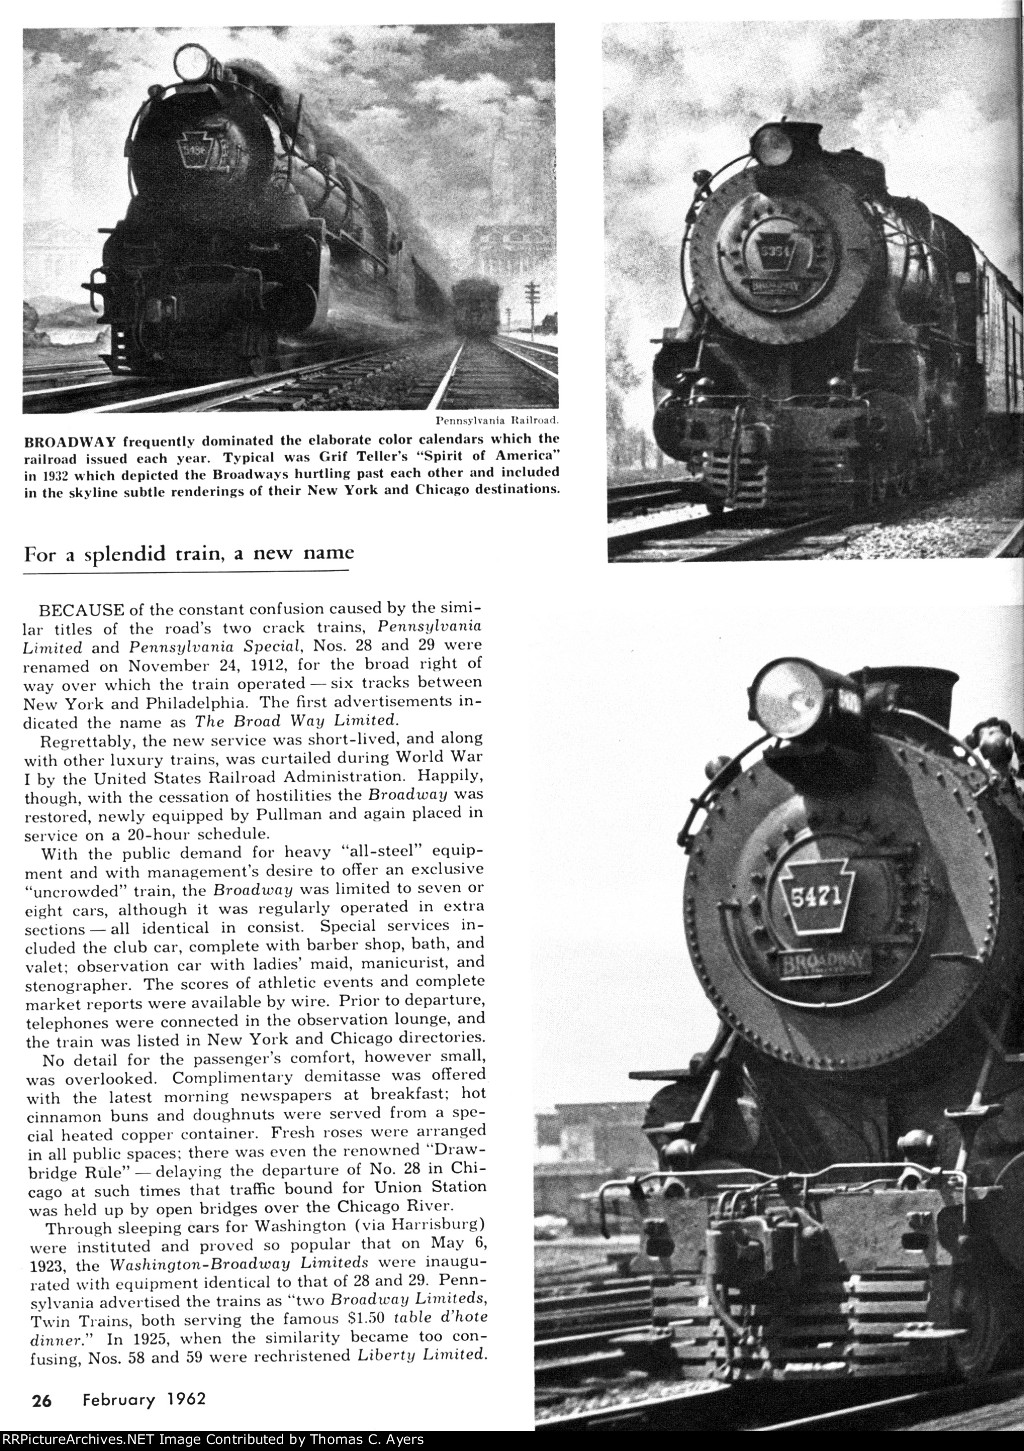 "The Broadway Limited," Page 26, 1962